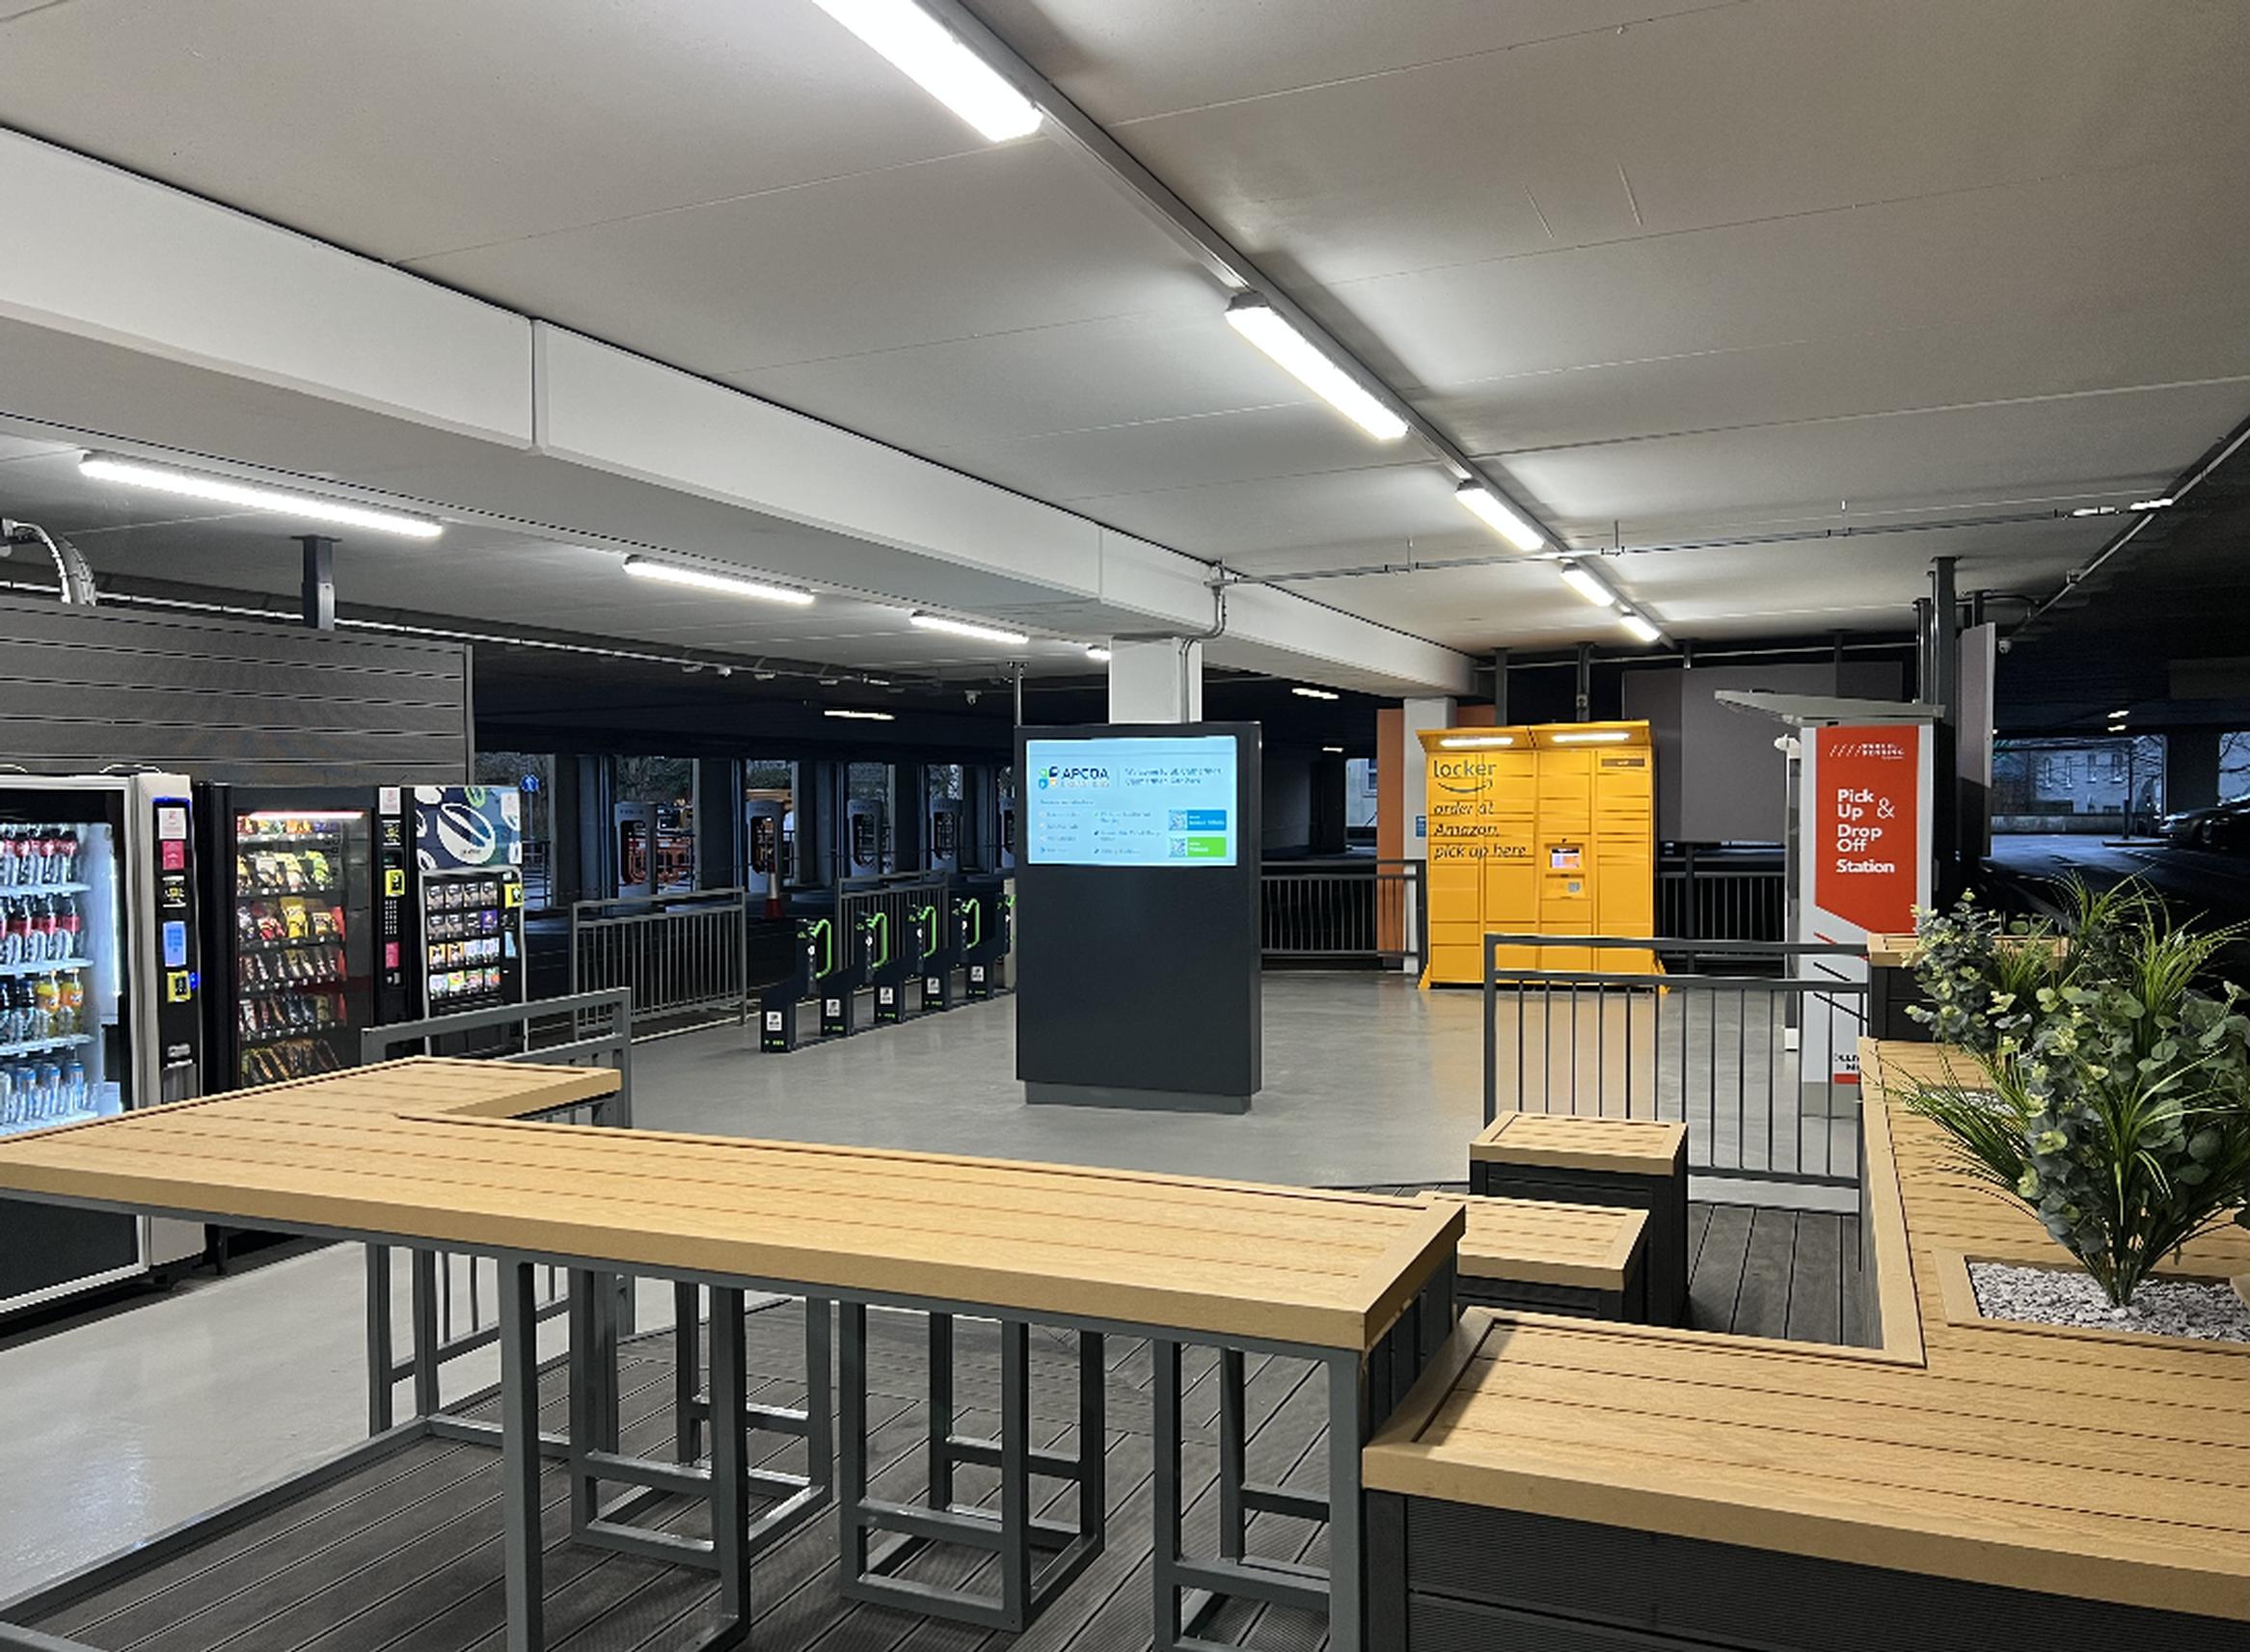 The Urban Mobility Hub features seating areas with vending machines